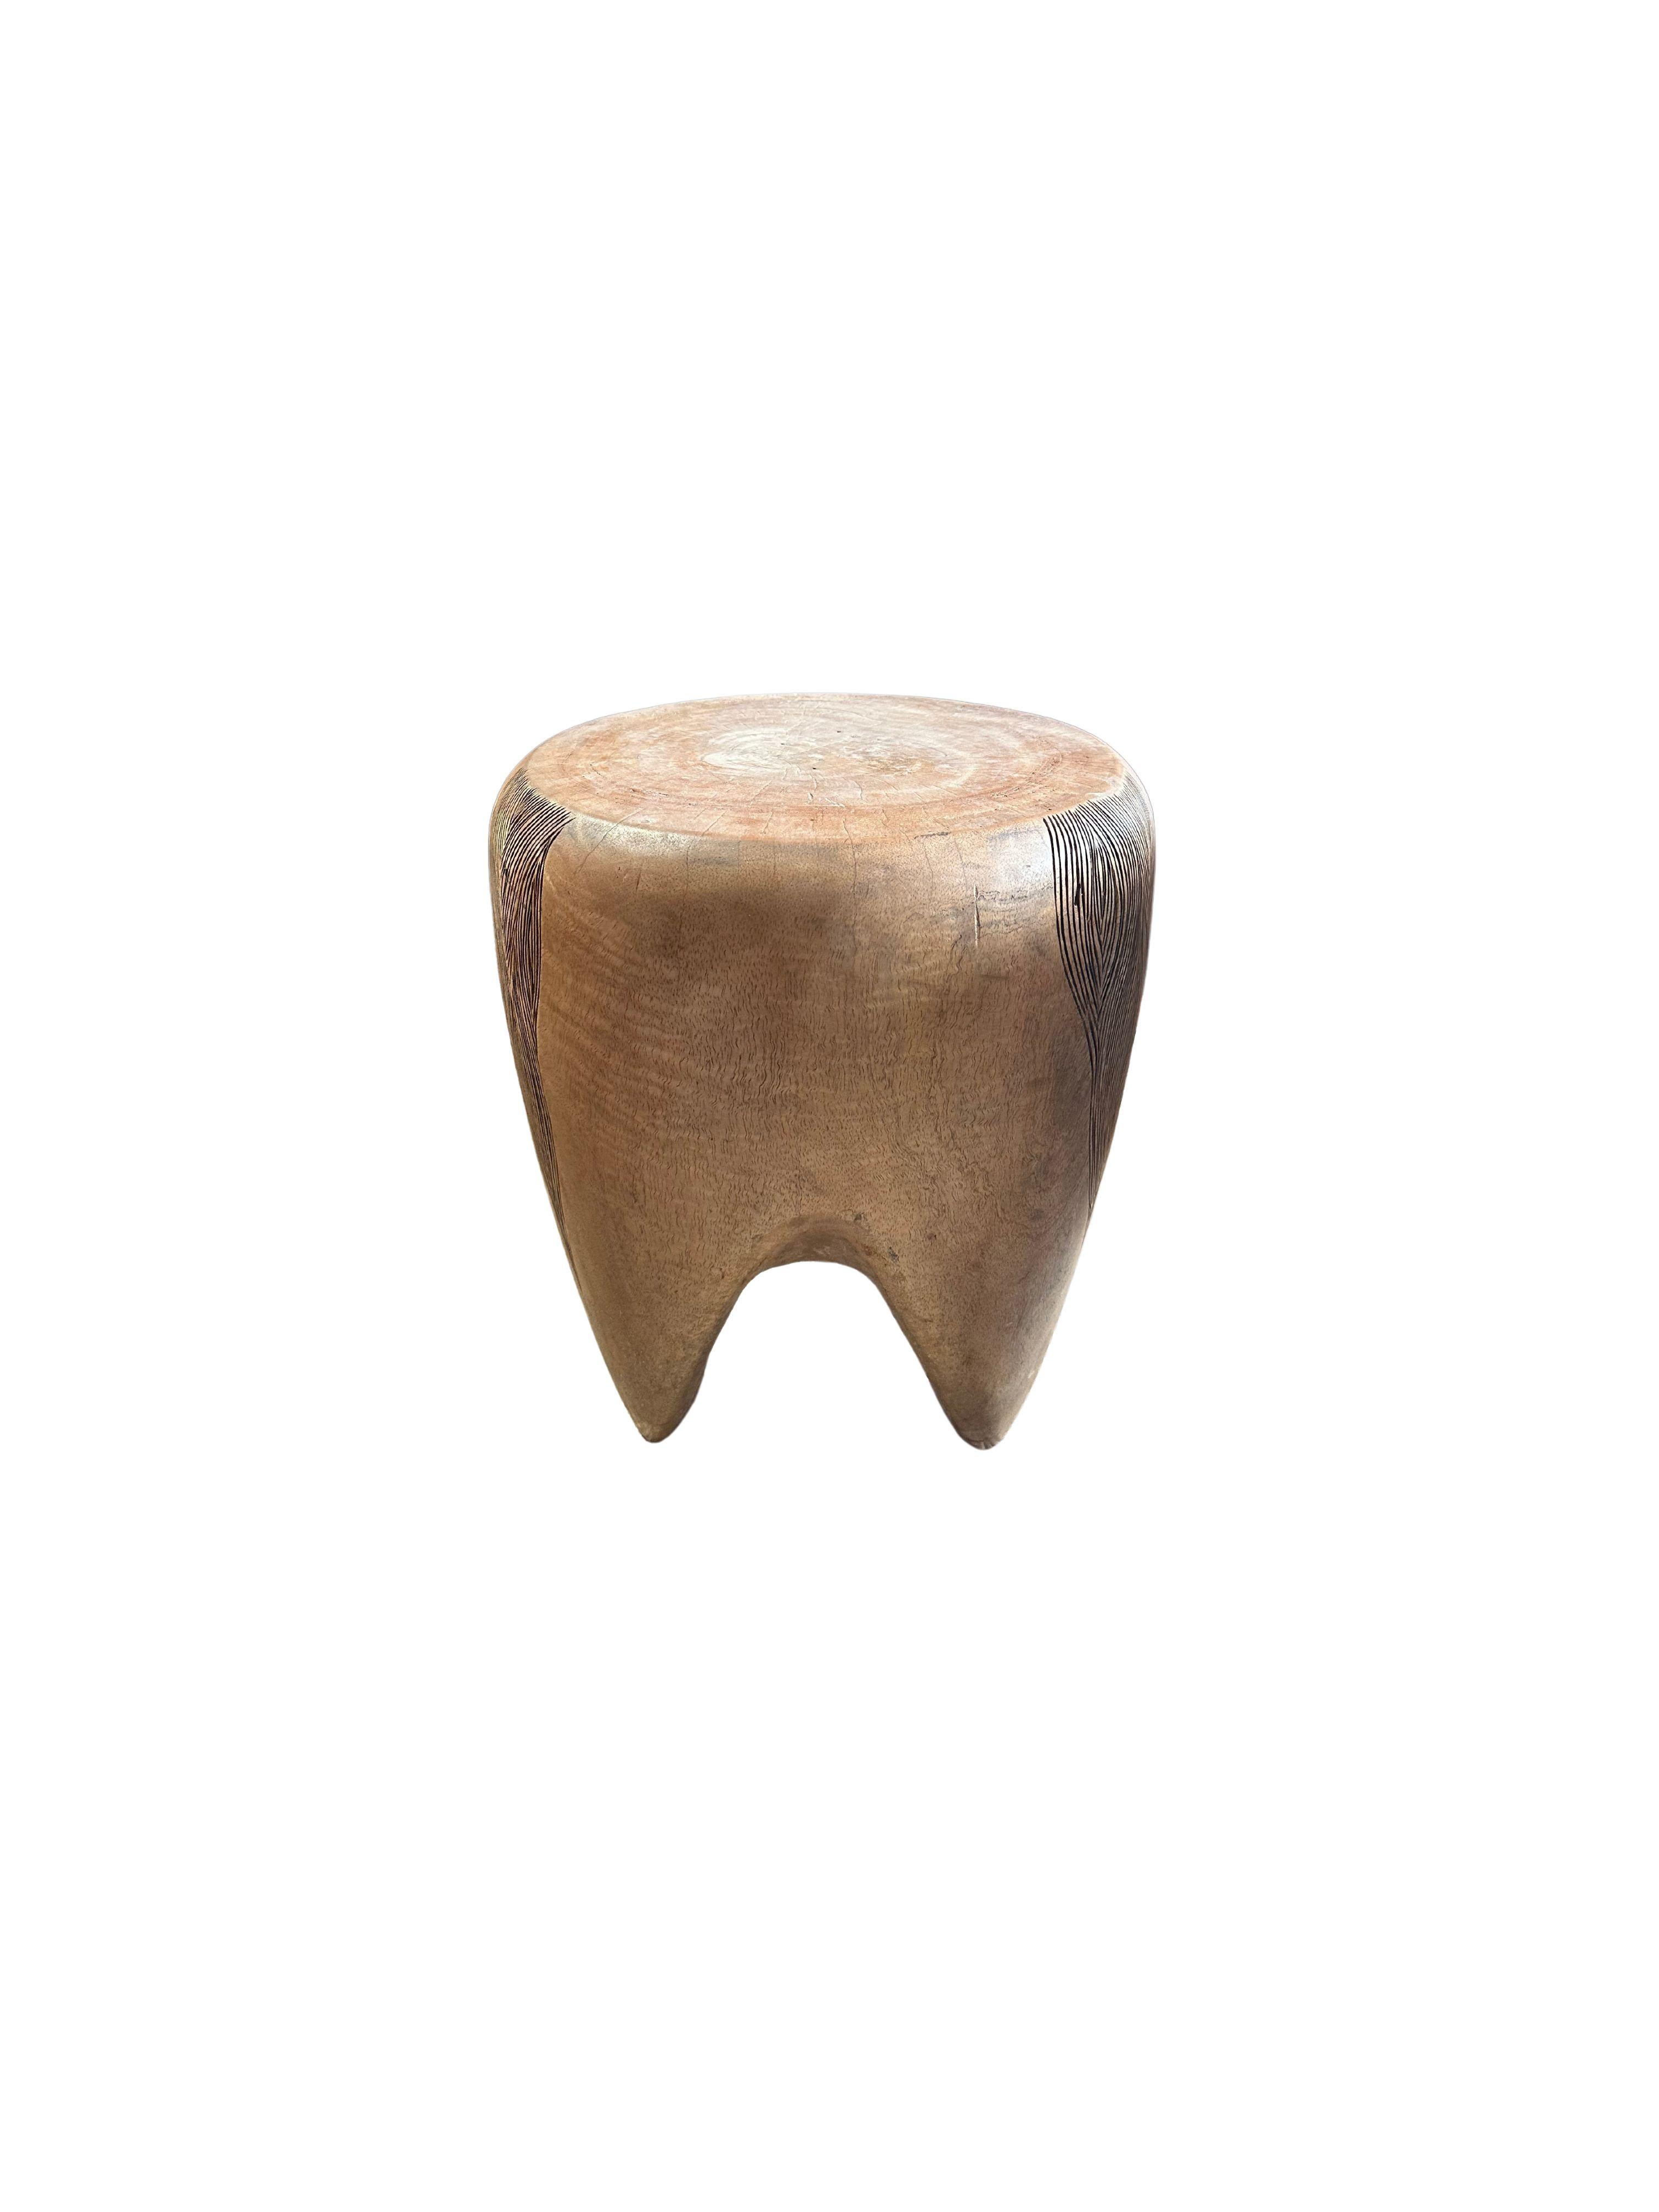 Sculptural Mango Wood Side Table, Hand-Crafted Modern Organic In Good Condition For Sale In Jimbaran, Bali